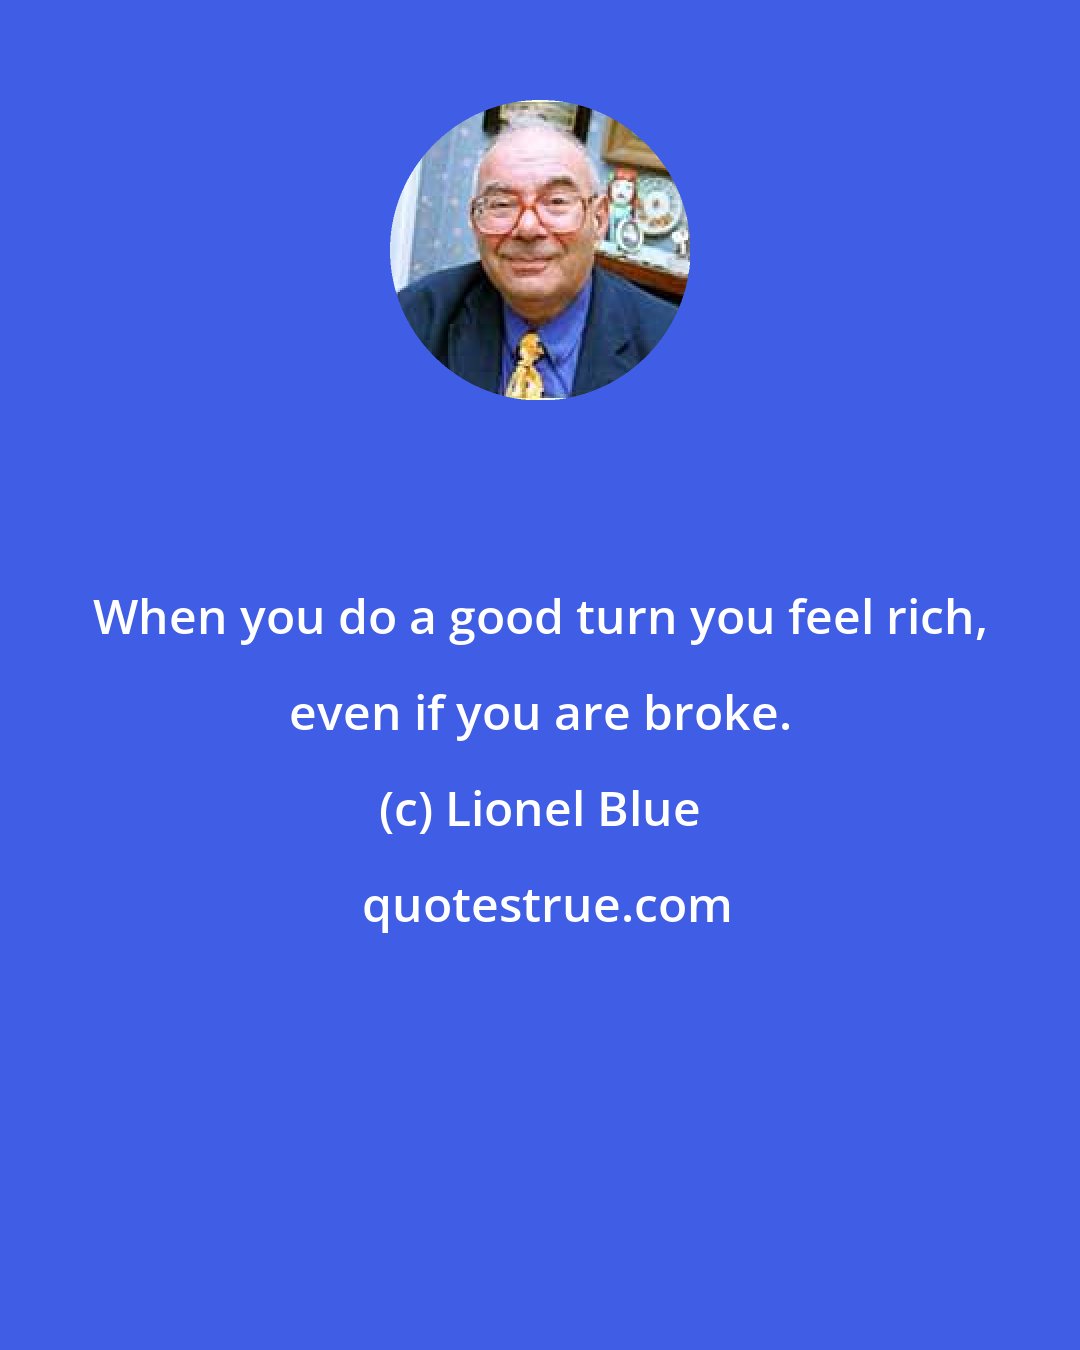 Lionel Blue: When you do a good turn you feel rich, even if you are broke.